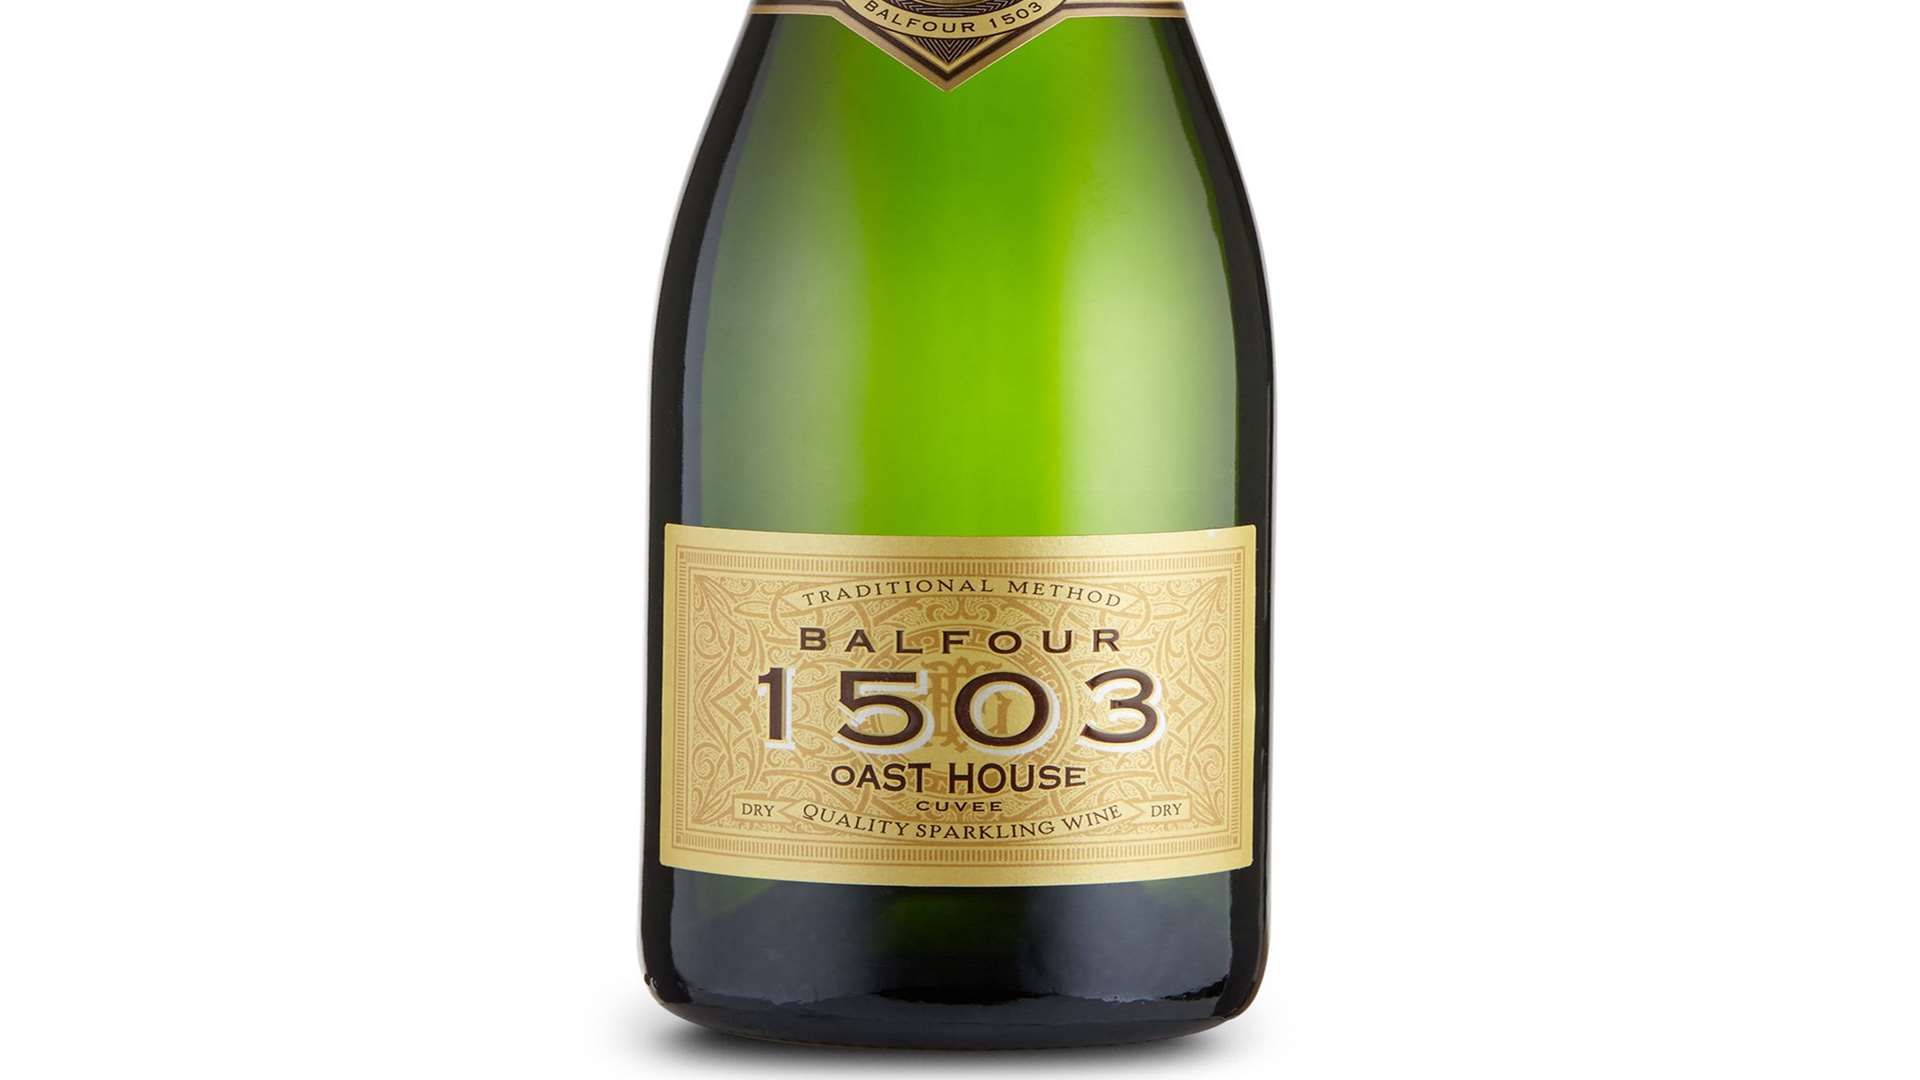 Hush Heath's Balfour 1503 Classic Cuvee will be sold in Canada